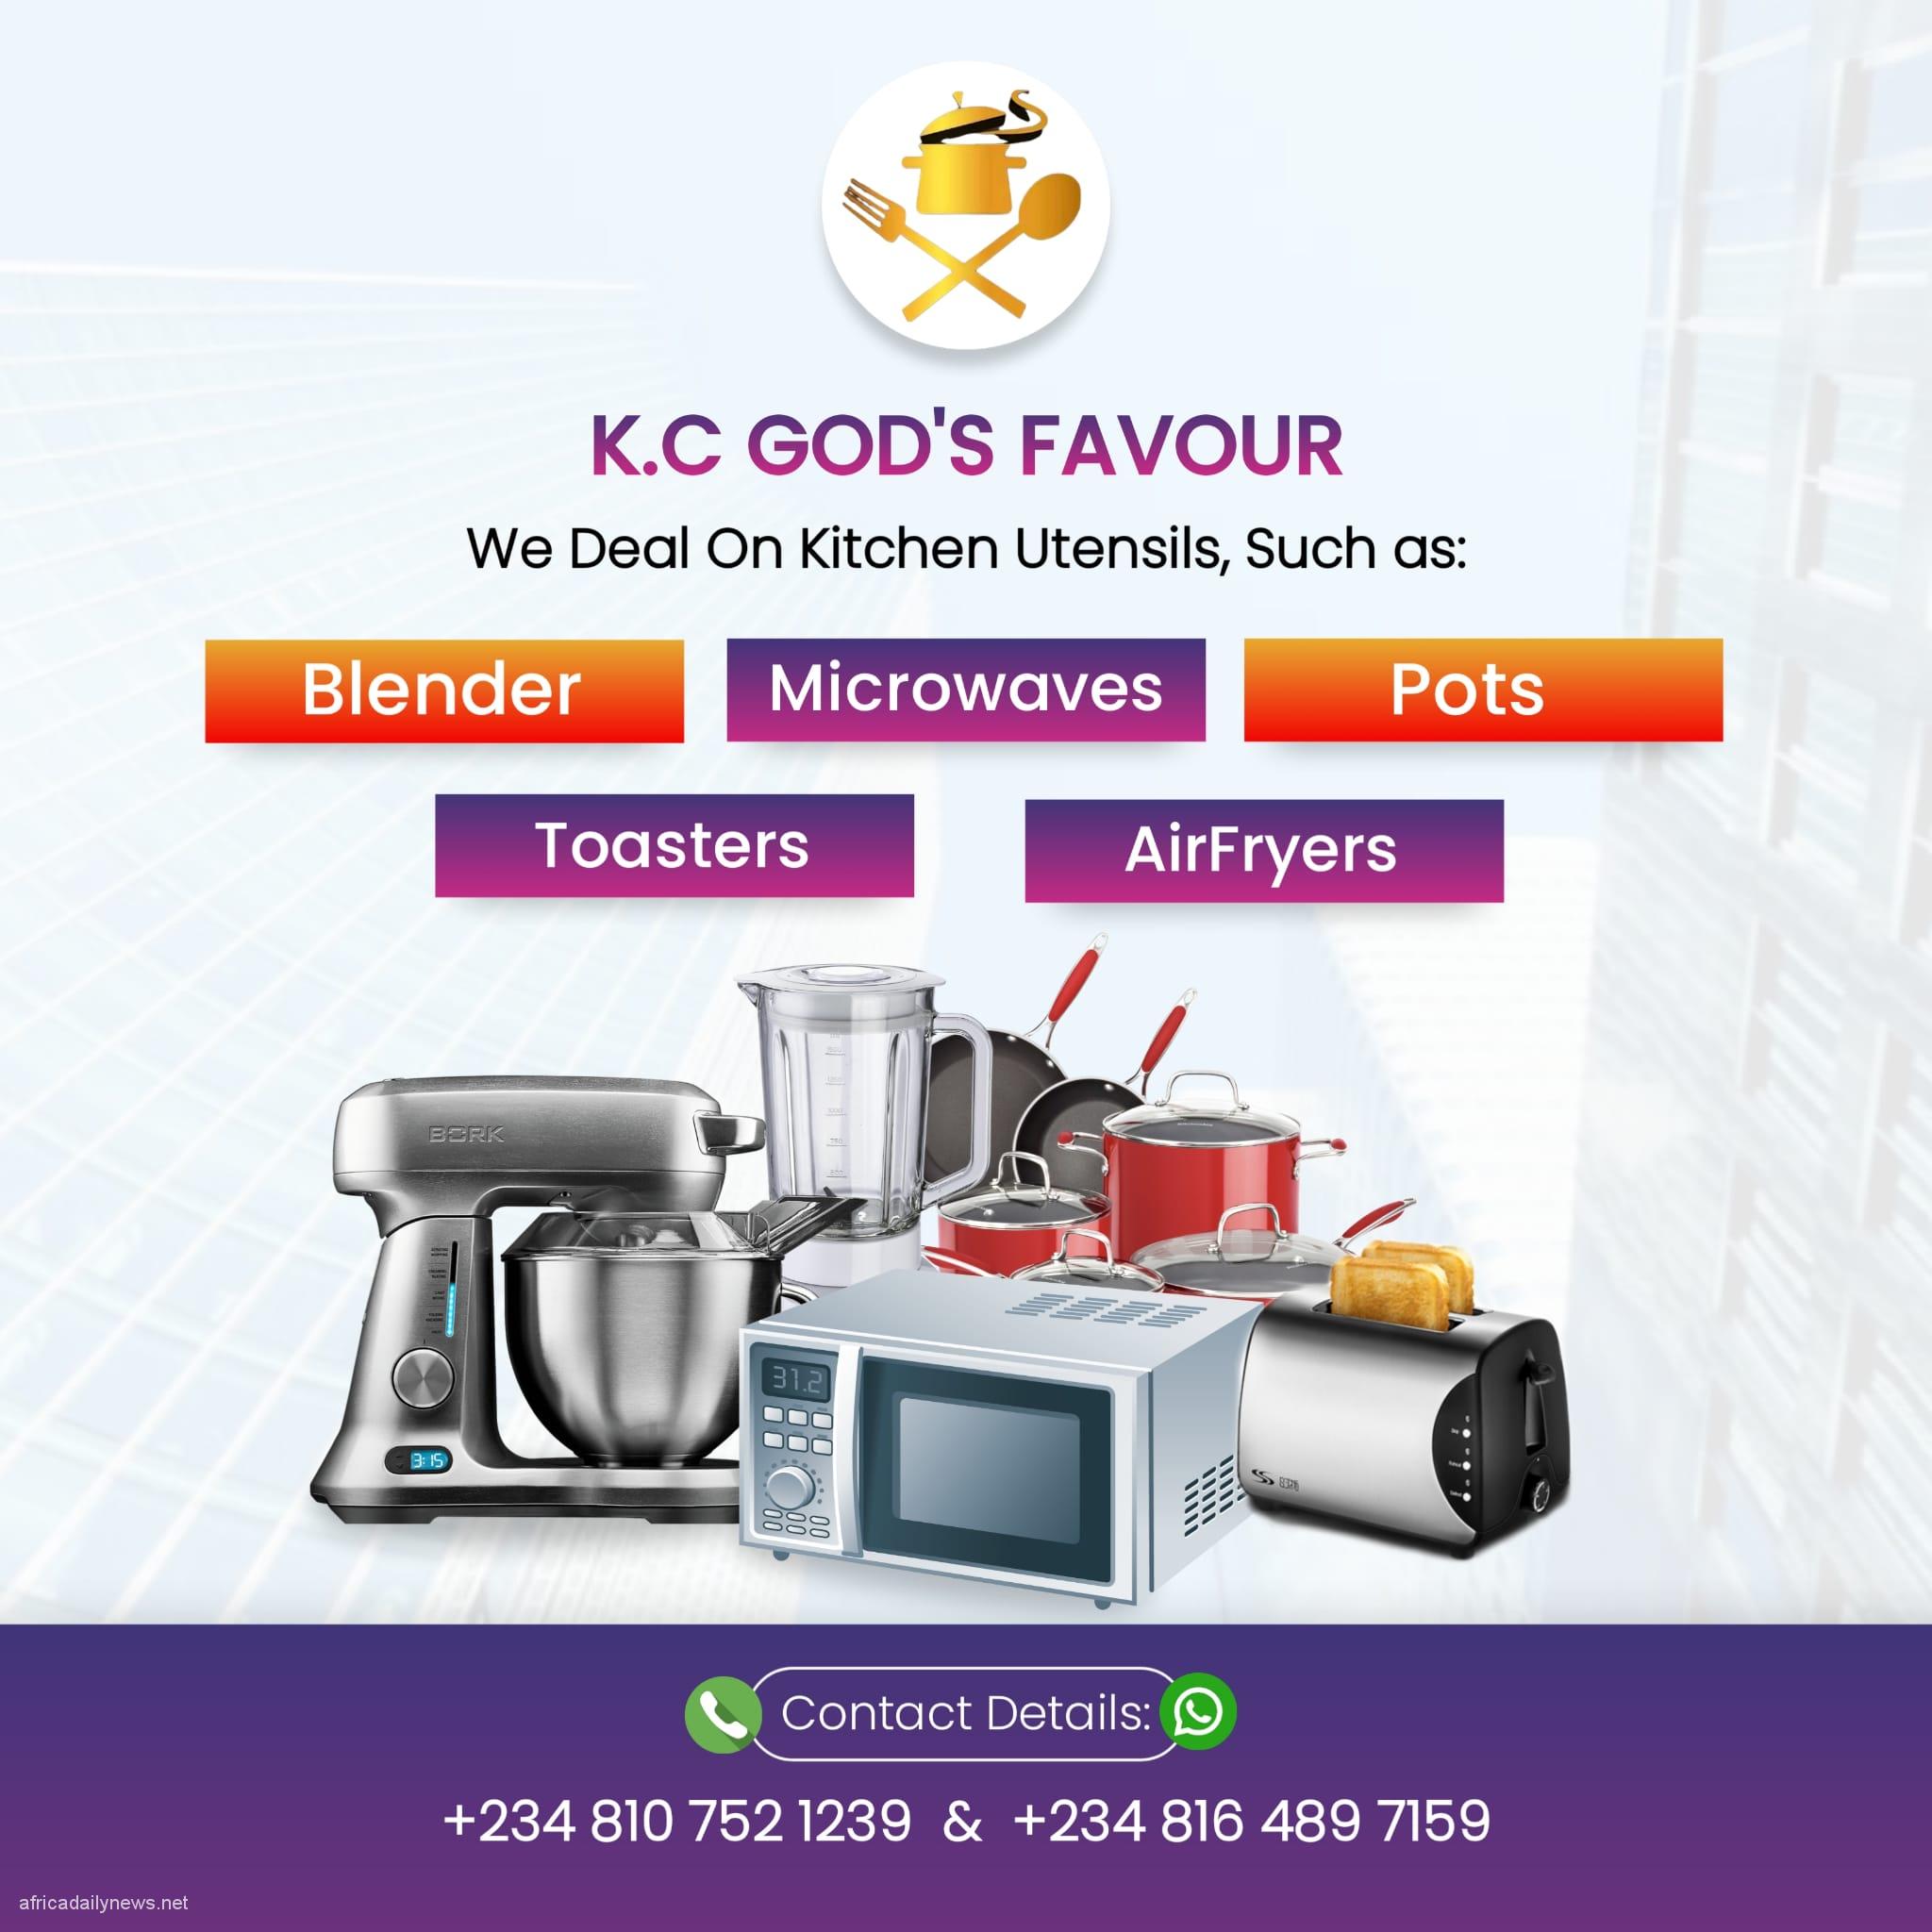 K.C God's Favour: Making Your Kitchen Top Class